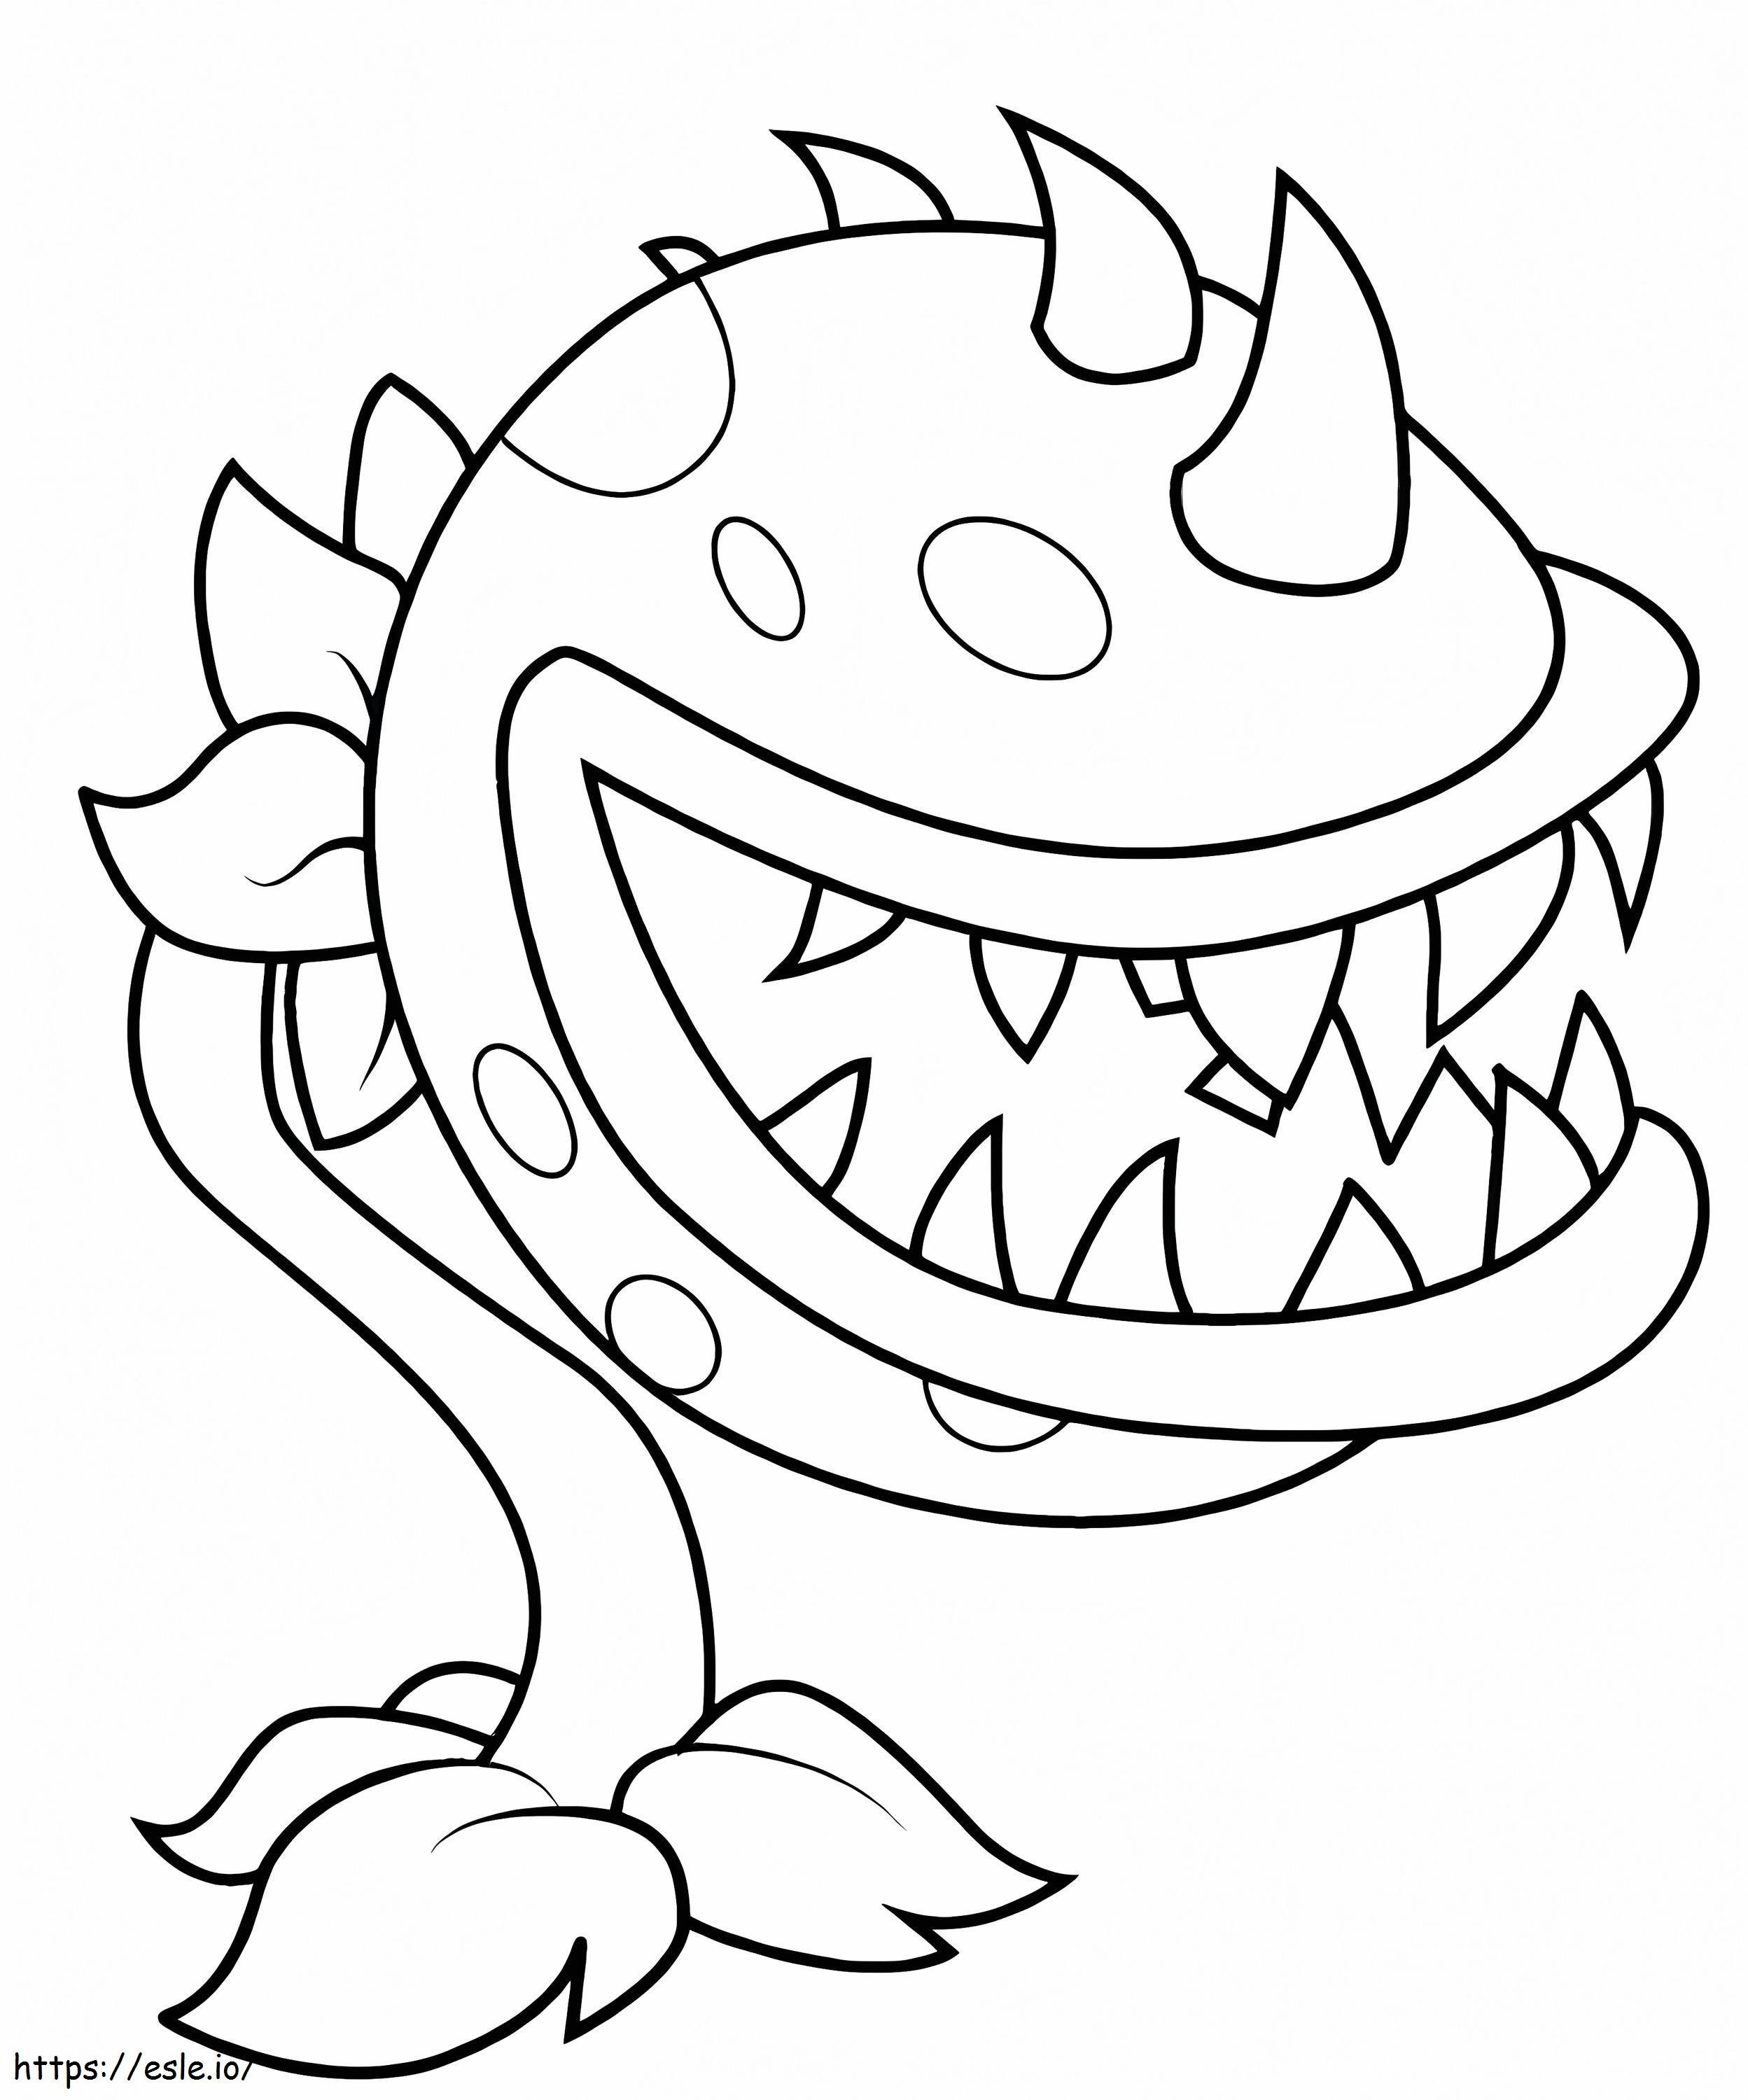 1545638347 Plants Vs Zombies Pictures To Print Awesome Of Plants Vs Zombies New Chomper Printable Kids Plants Vs Zombies Coloring Pictures To Print coloring page